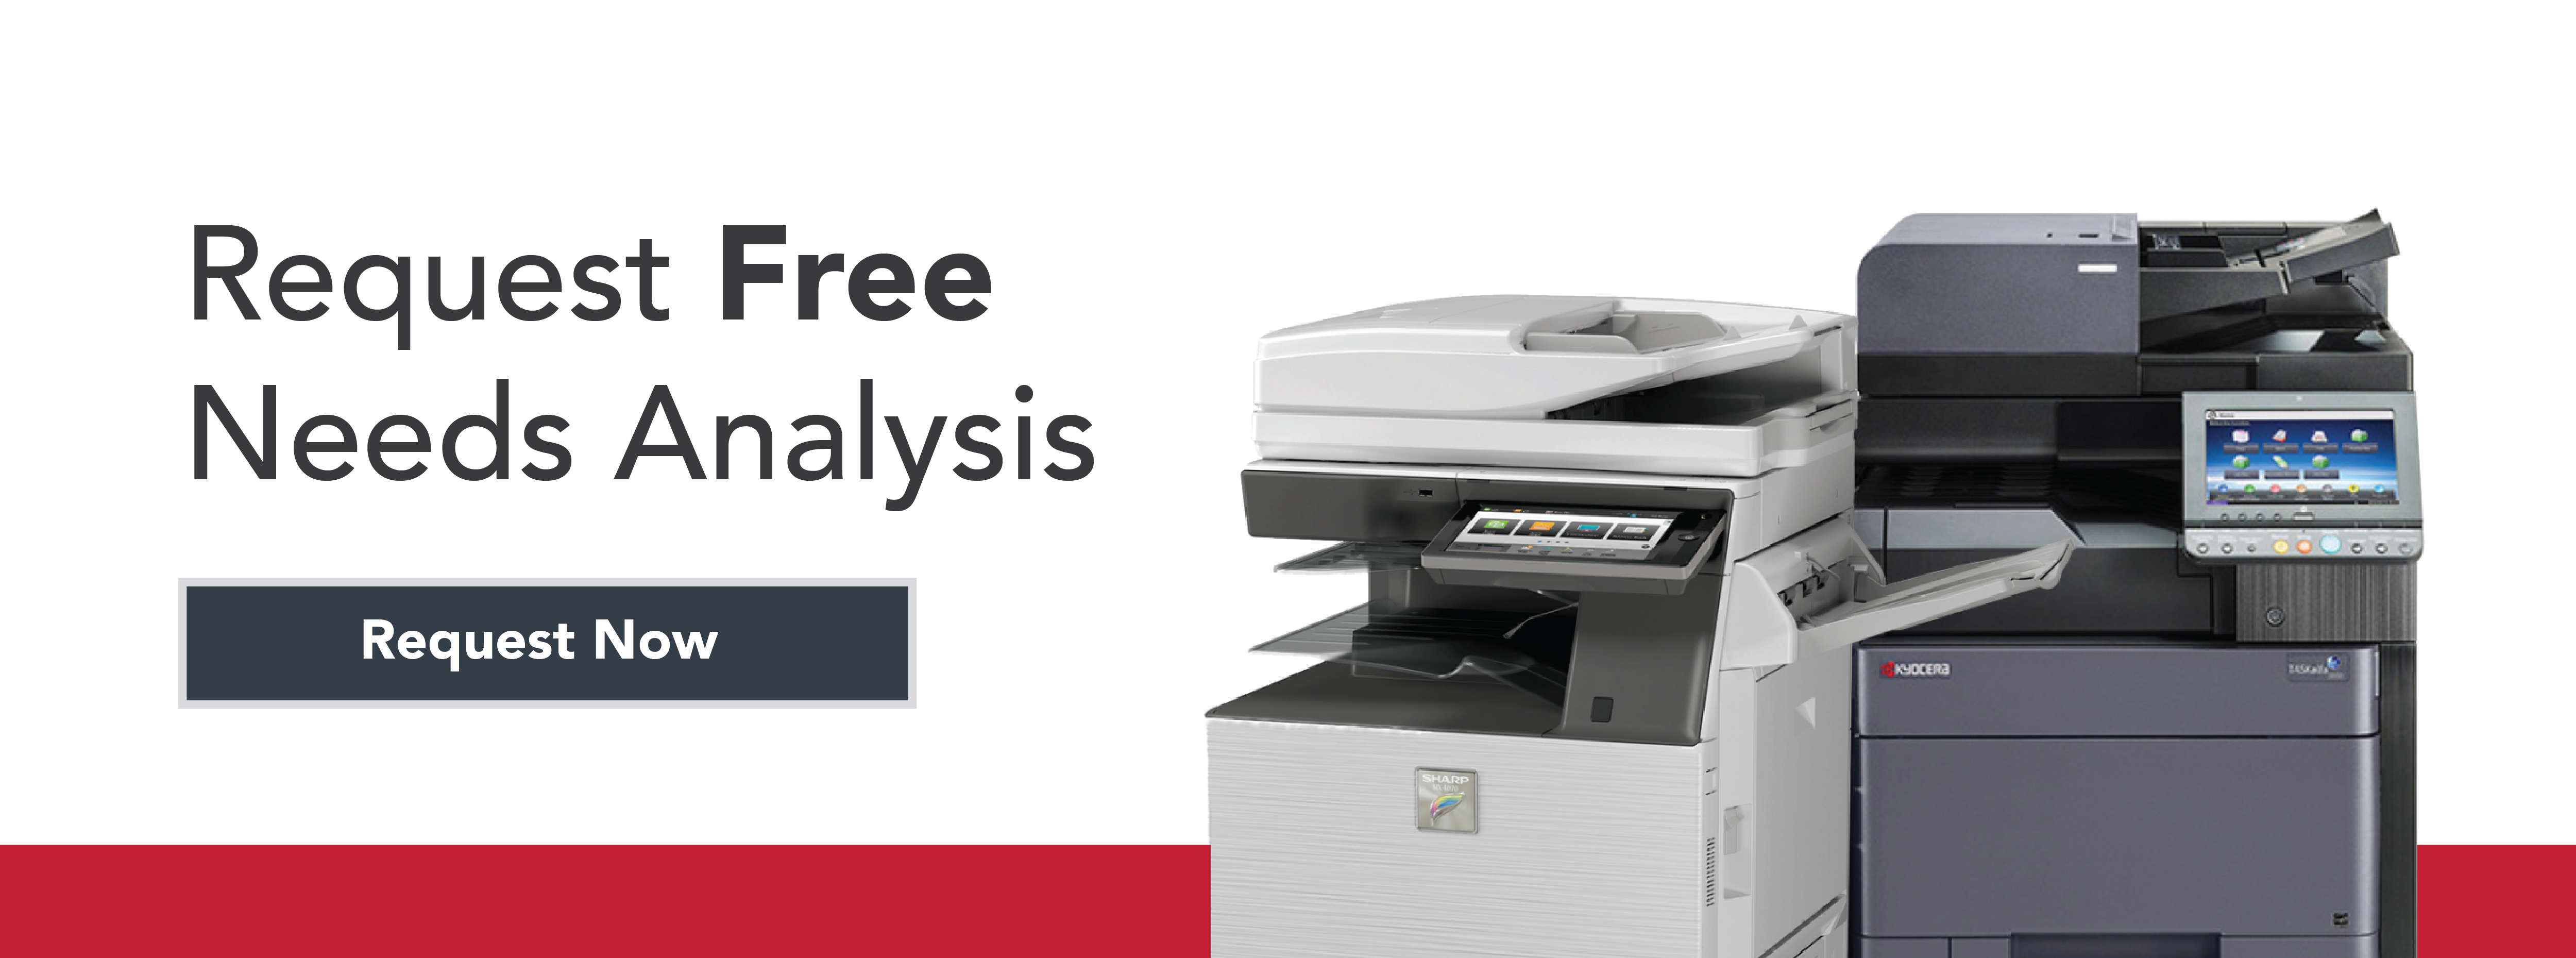 Request your free copy and print needs analysis - Request Now Button